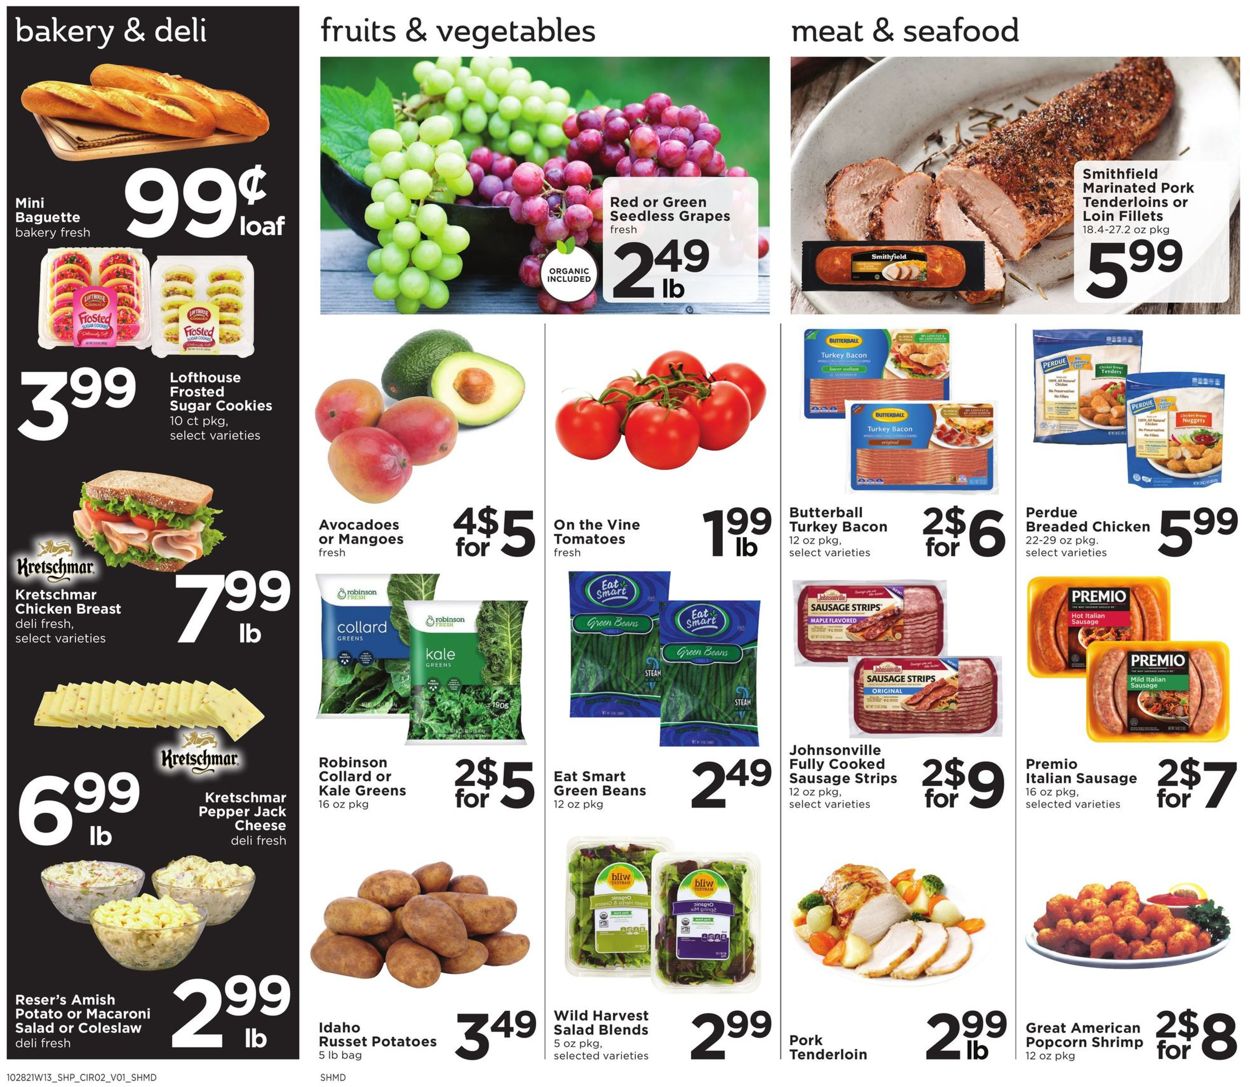 Shoppers Food & Pharmacy Ad from 10/28/2021